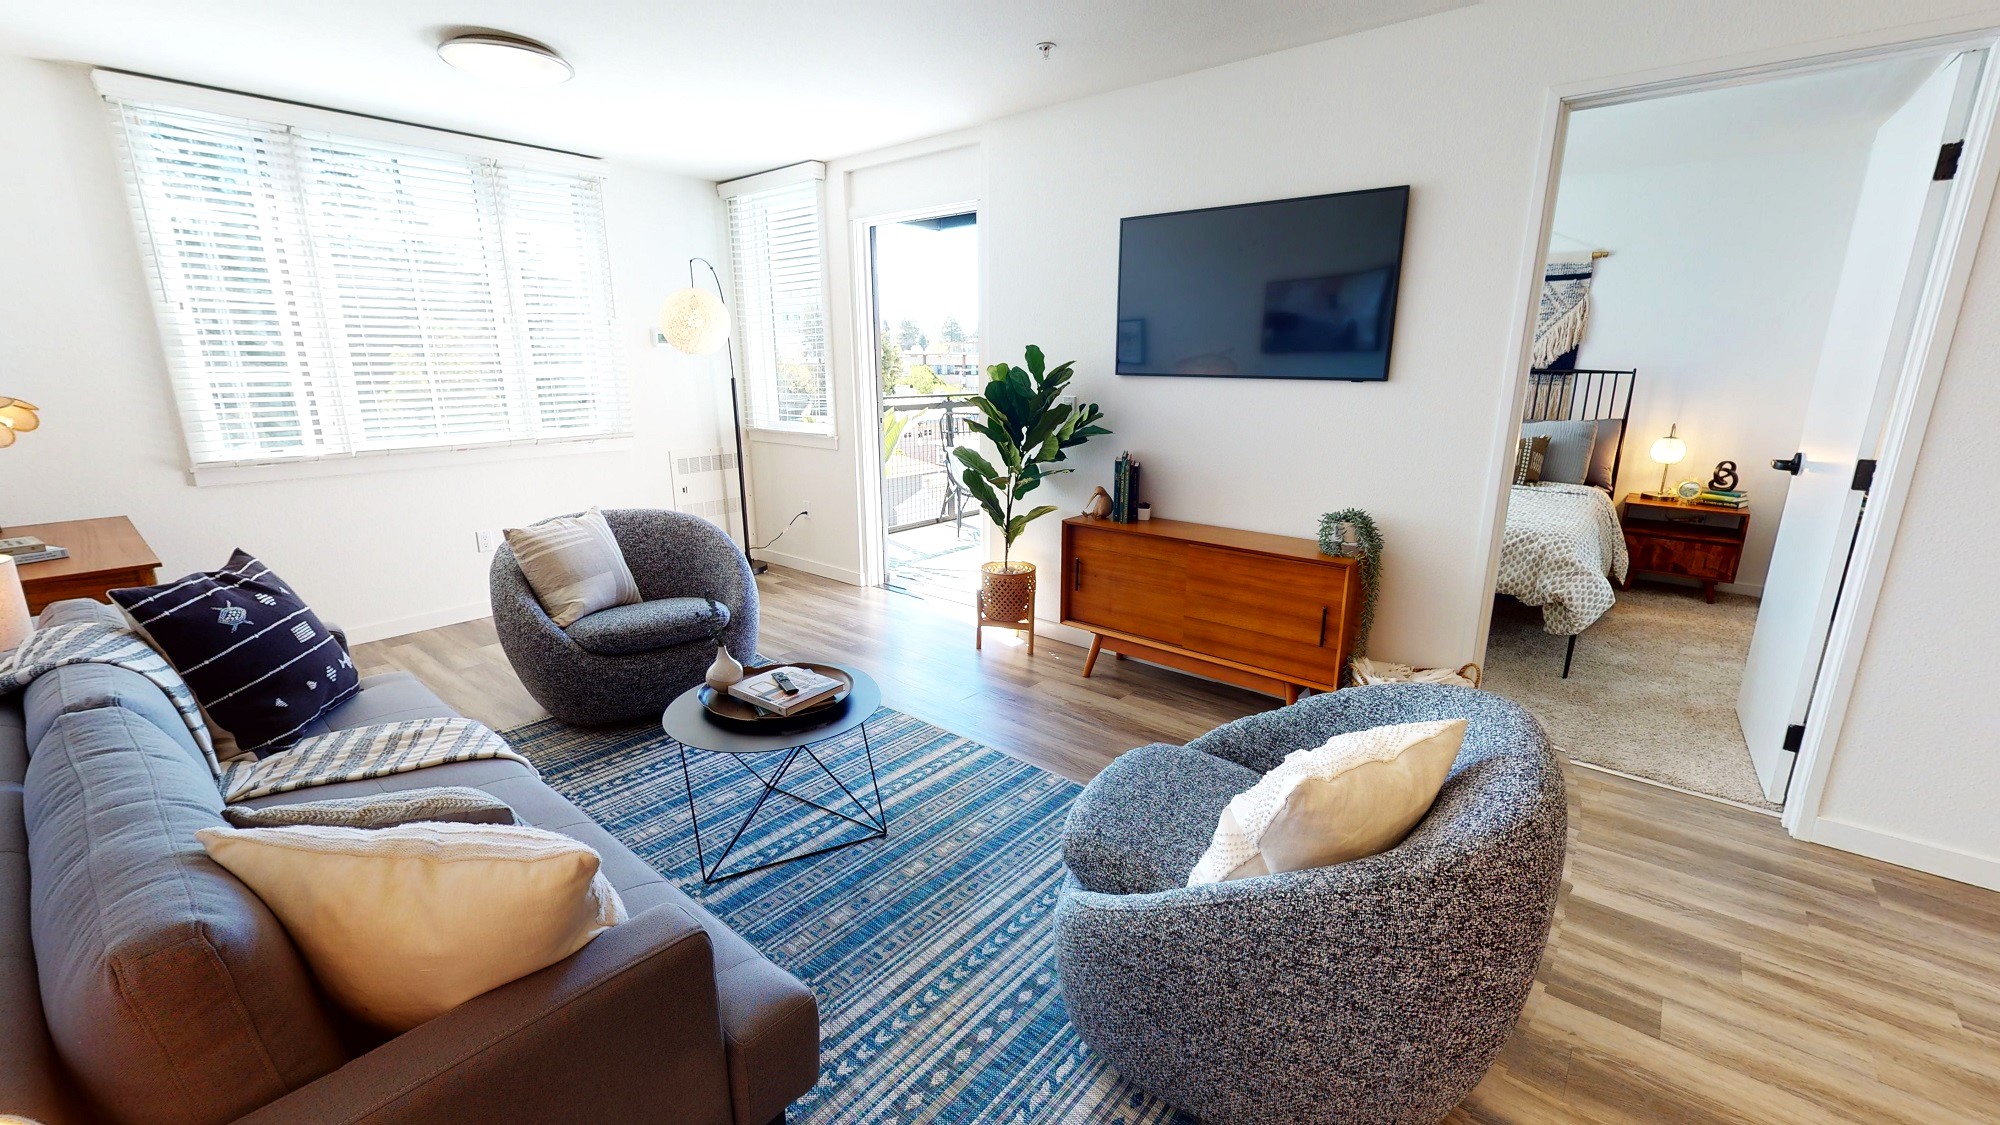 Furnished living room, bedroom, and patio at Telegraph Gardens in Berkeley, California.